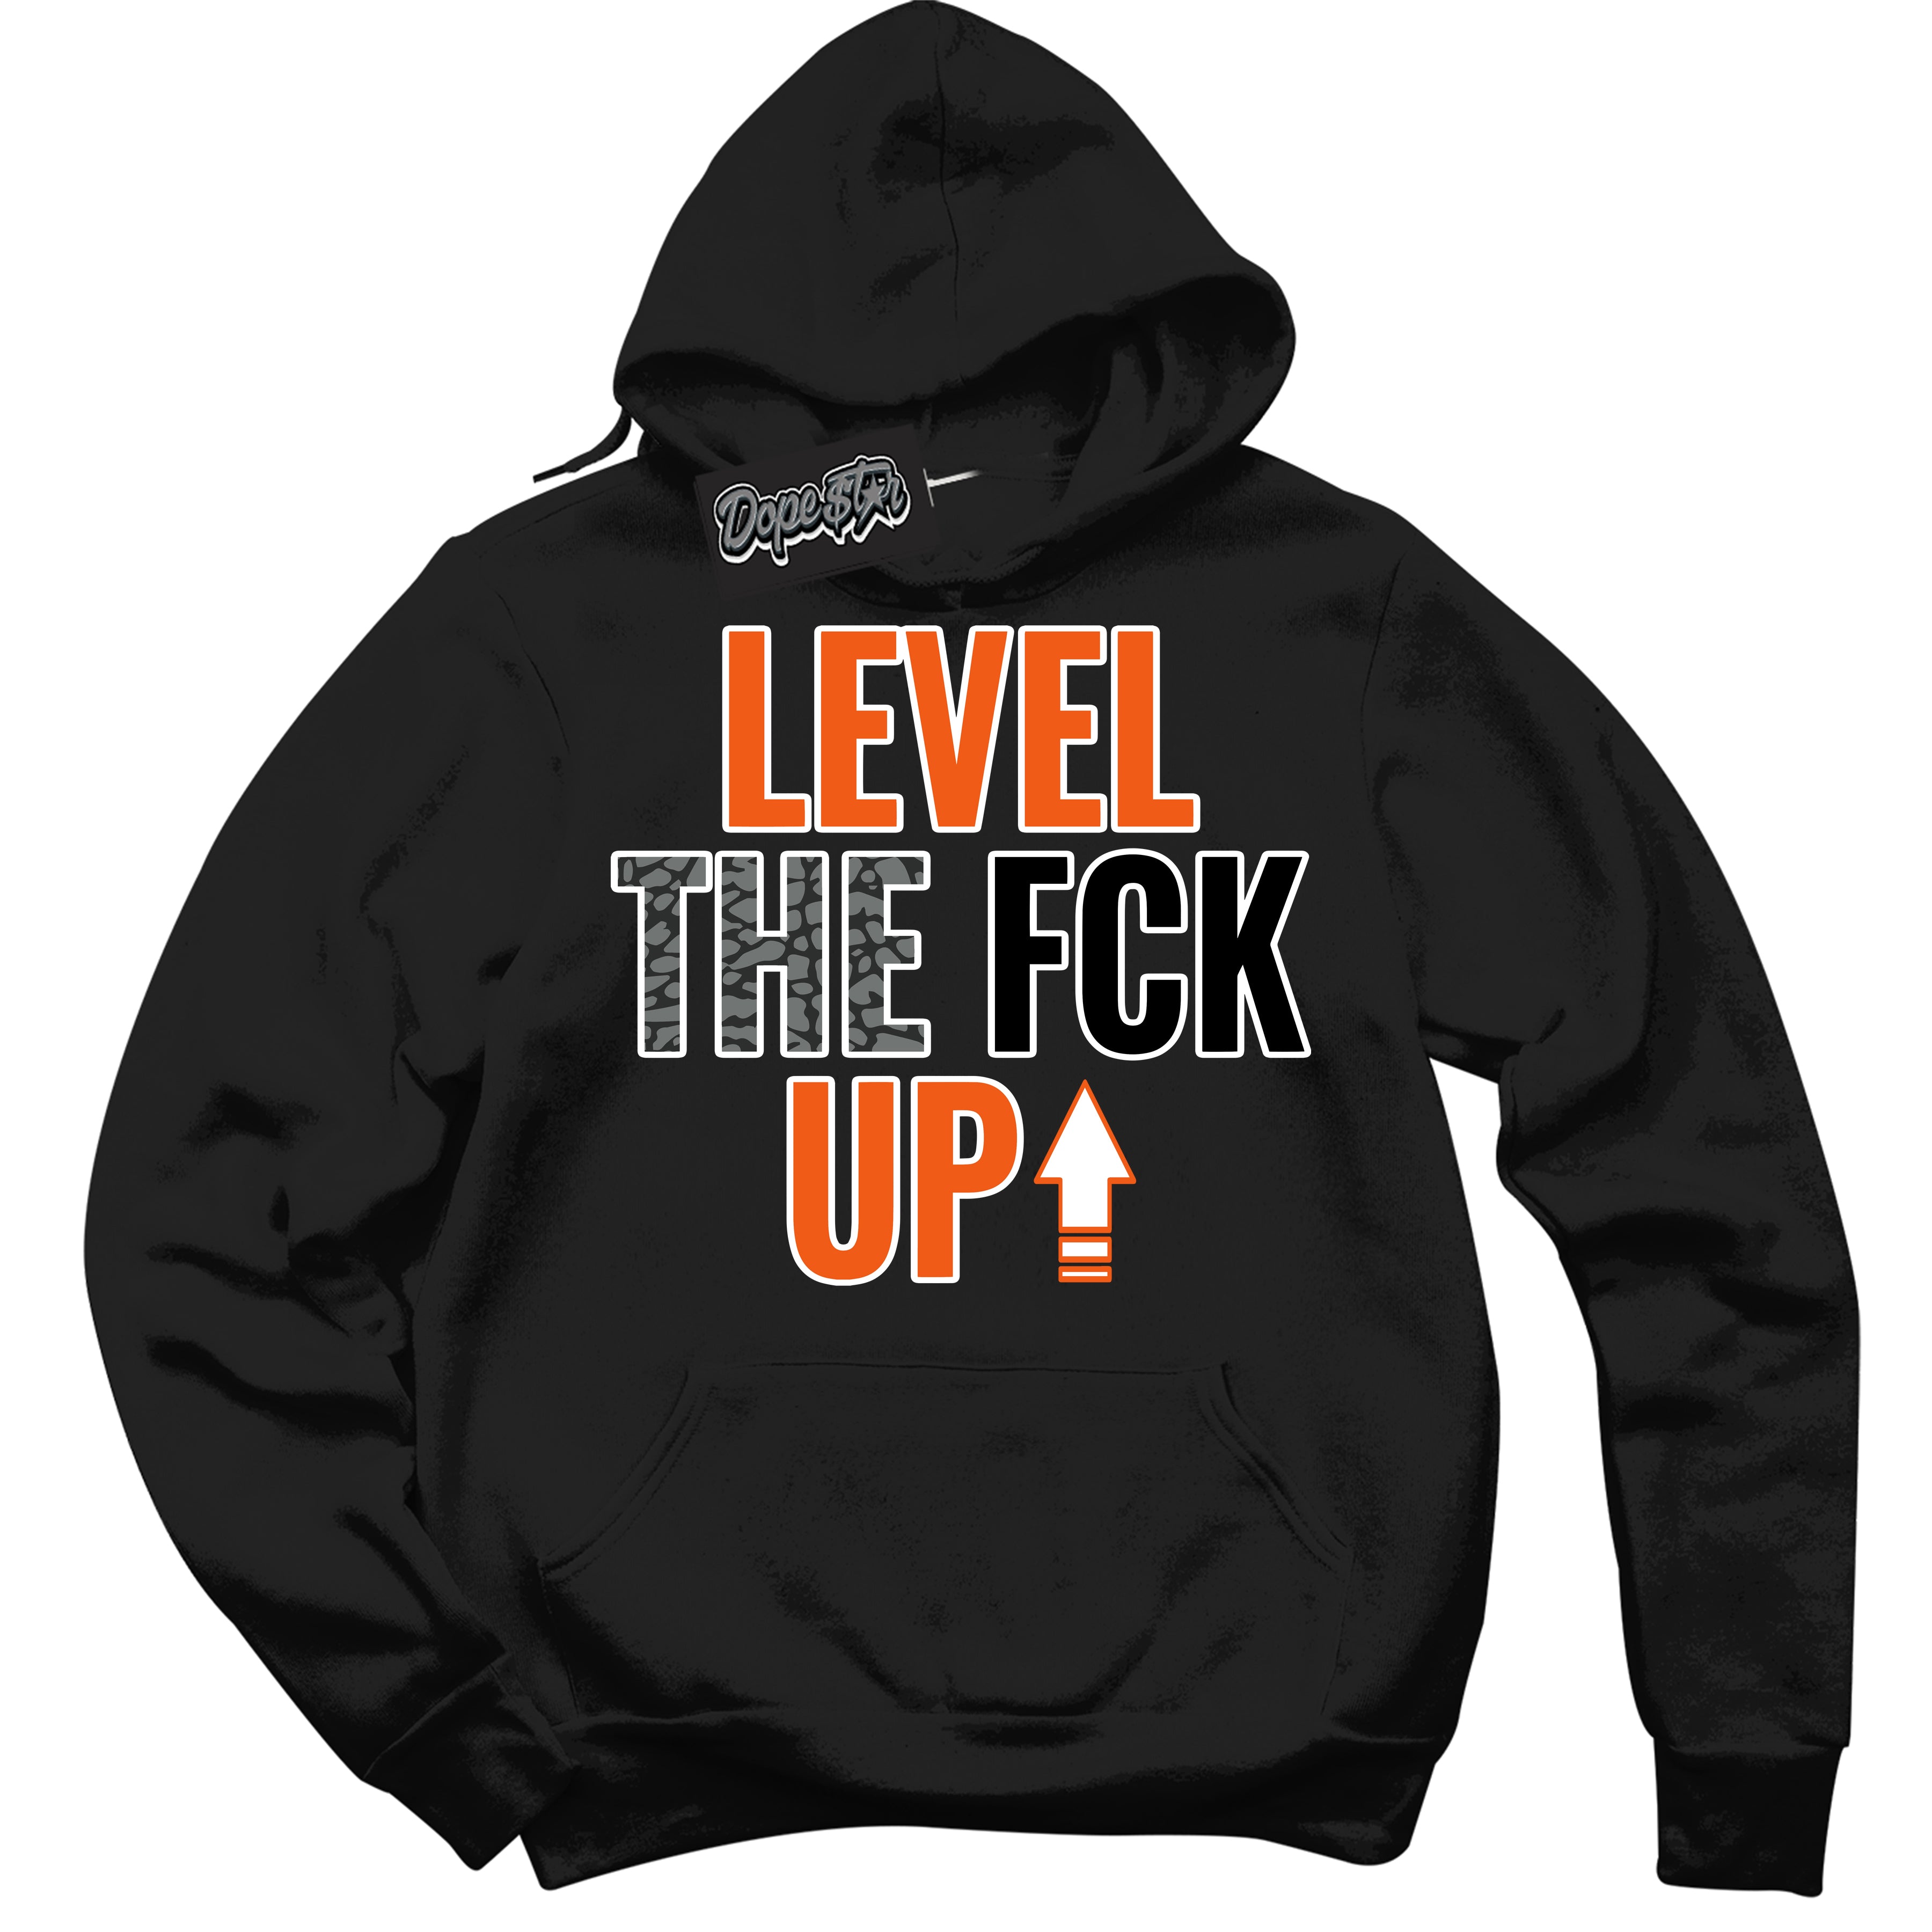 Cool Black Graphic DopeStar Hoodie with “ Level The Fck Up “ print, that perfectly matches Fear Pack 3s sneakers